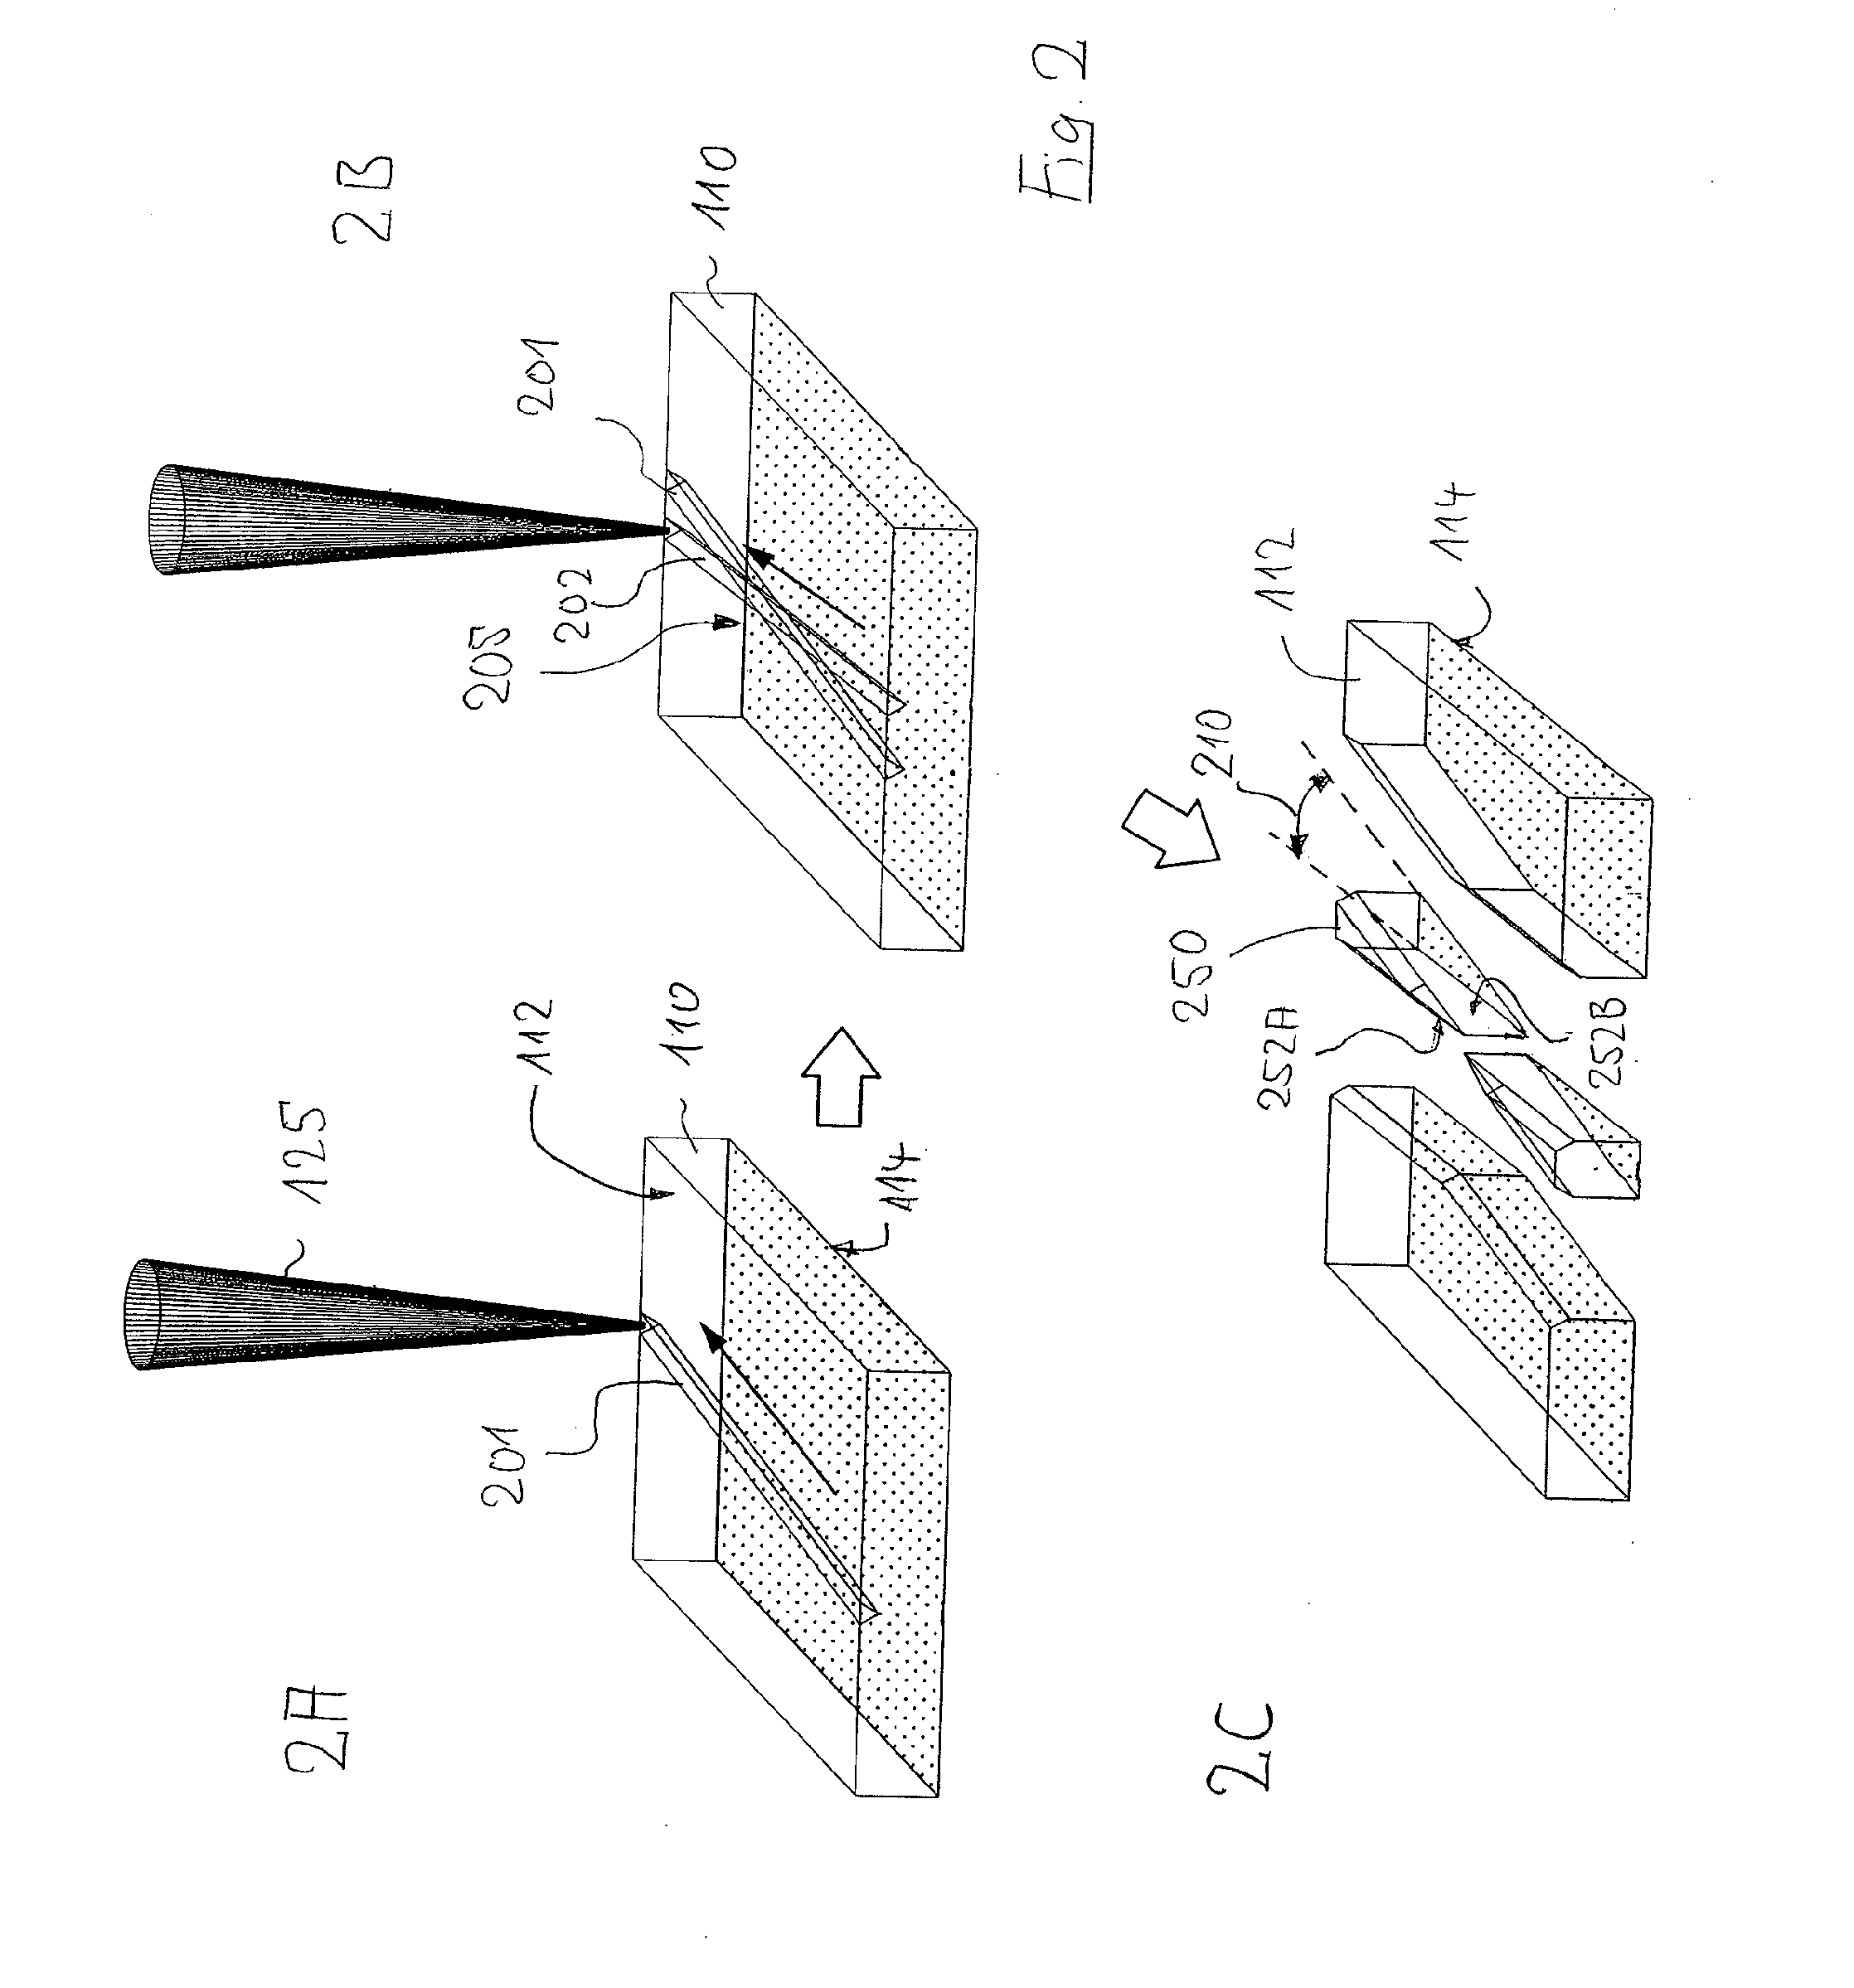 Method and Apparatus for Producing Samples for Transmission Electron Microscopy